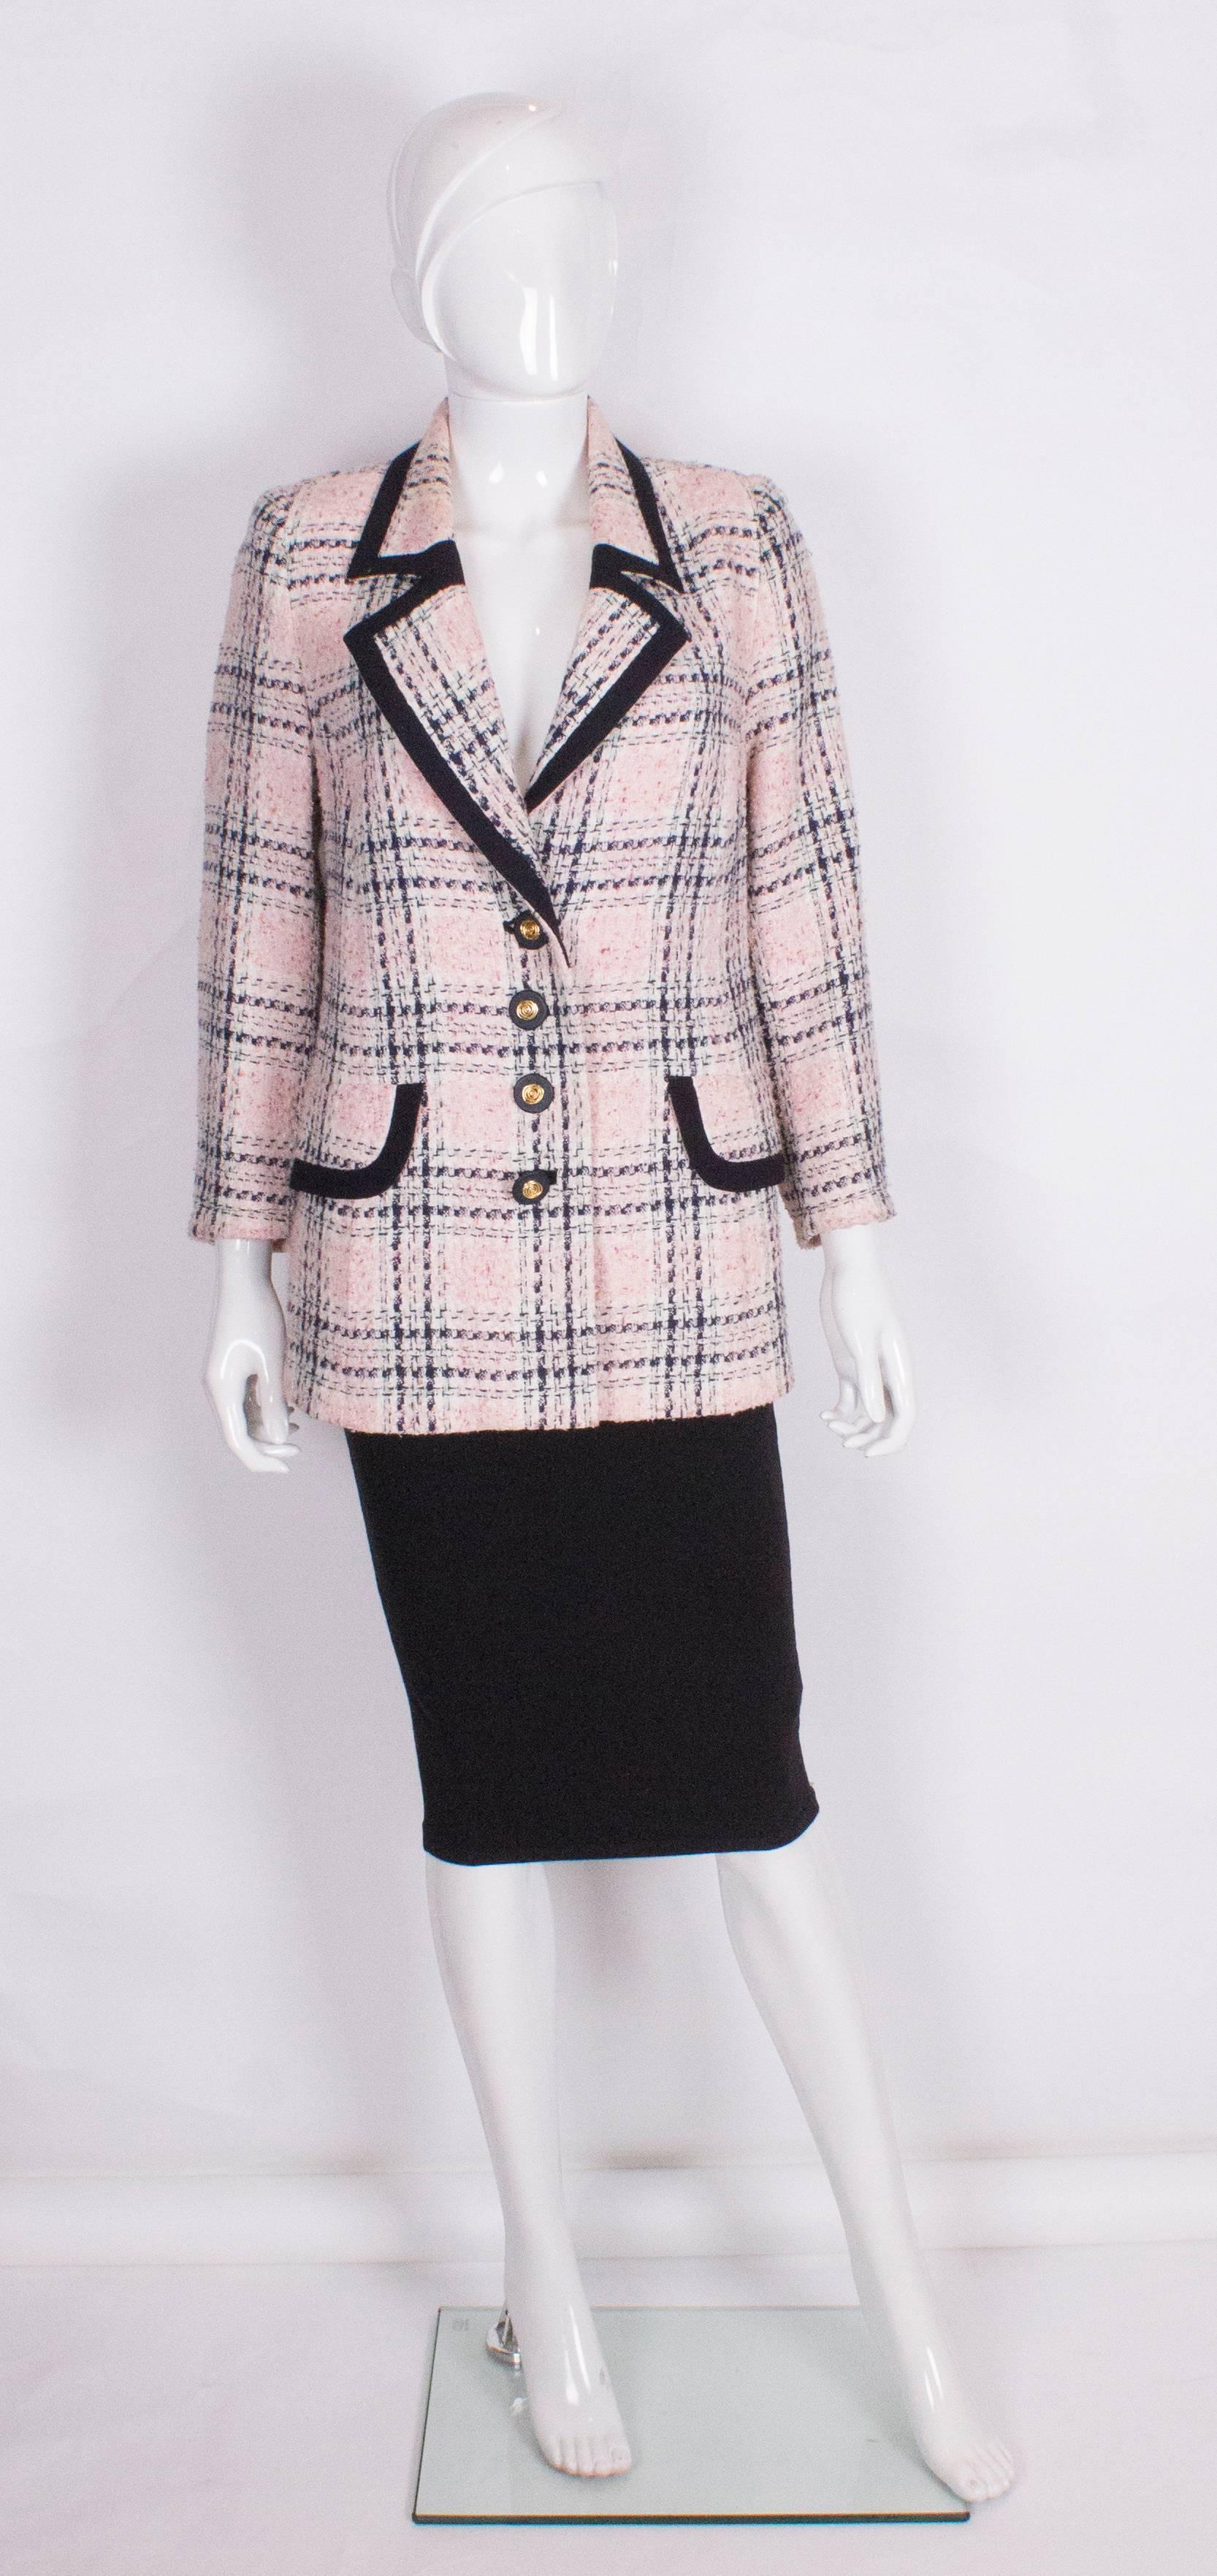 A chic jacket by Hardy Amies. The jacket is a pink and blue tweed like mix, with a v neckline, 4 button central opening and 2 faux pockets. It is fully lined.